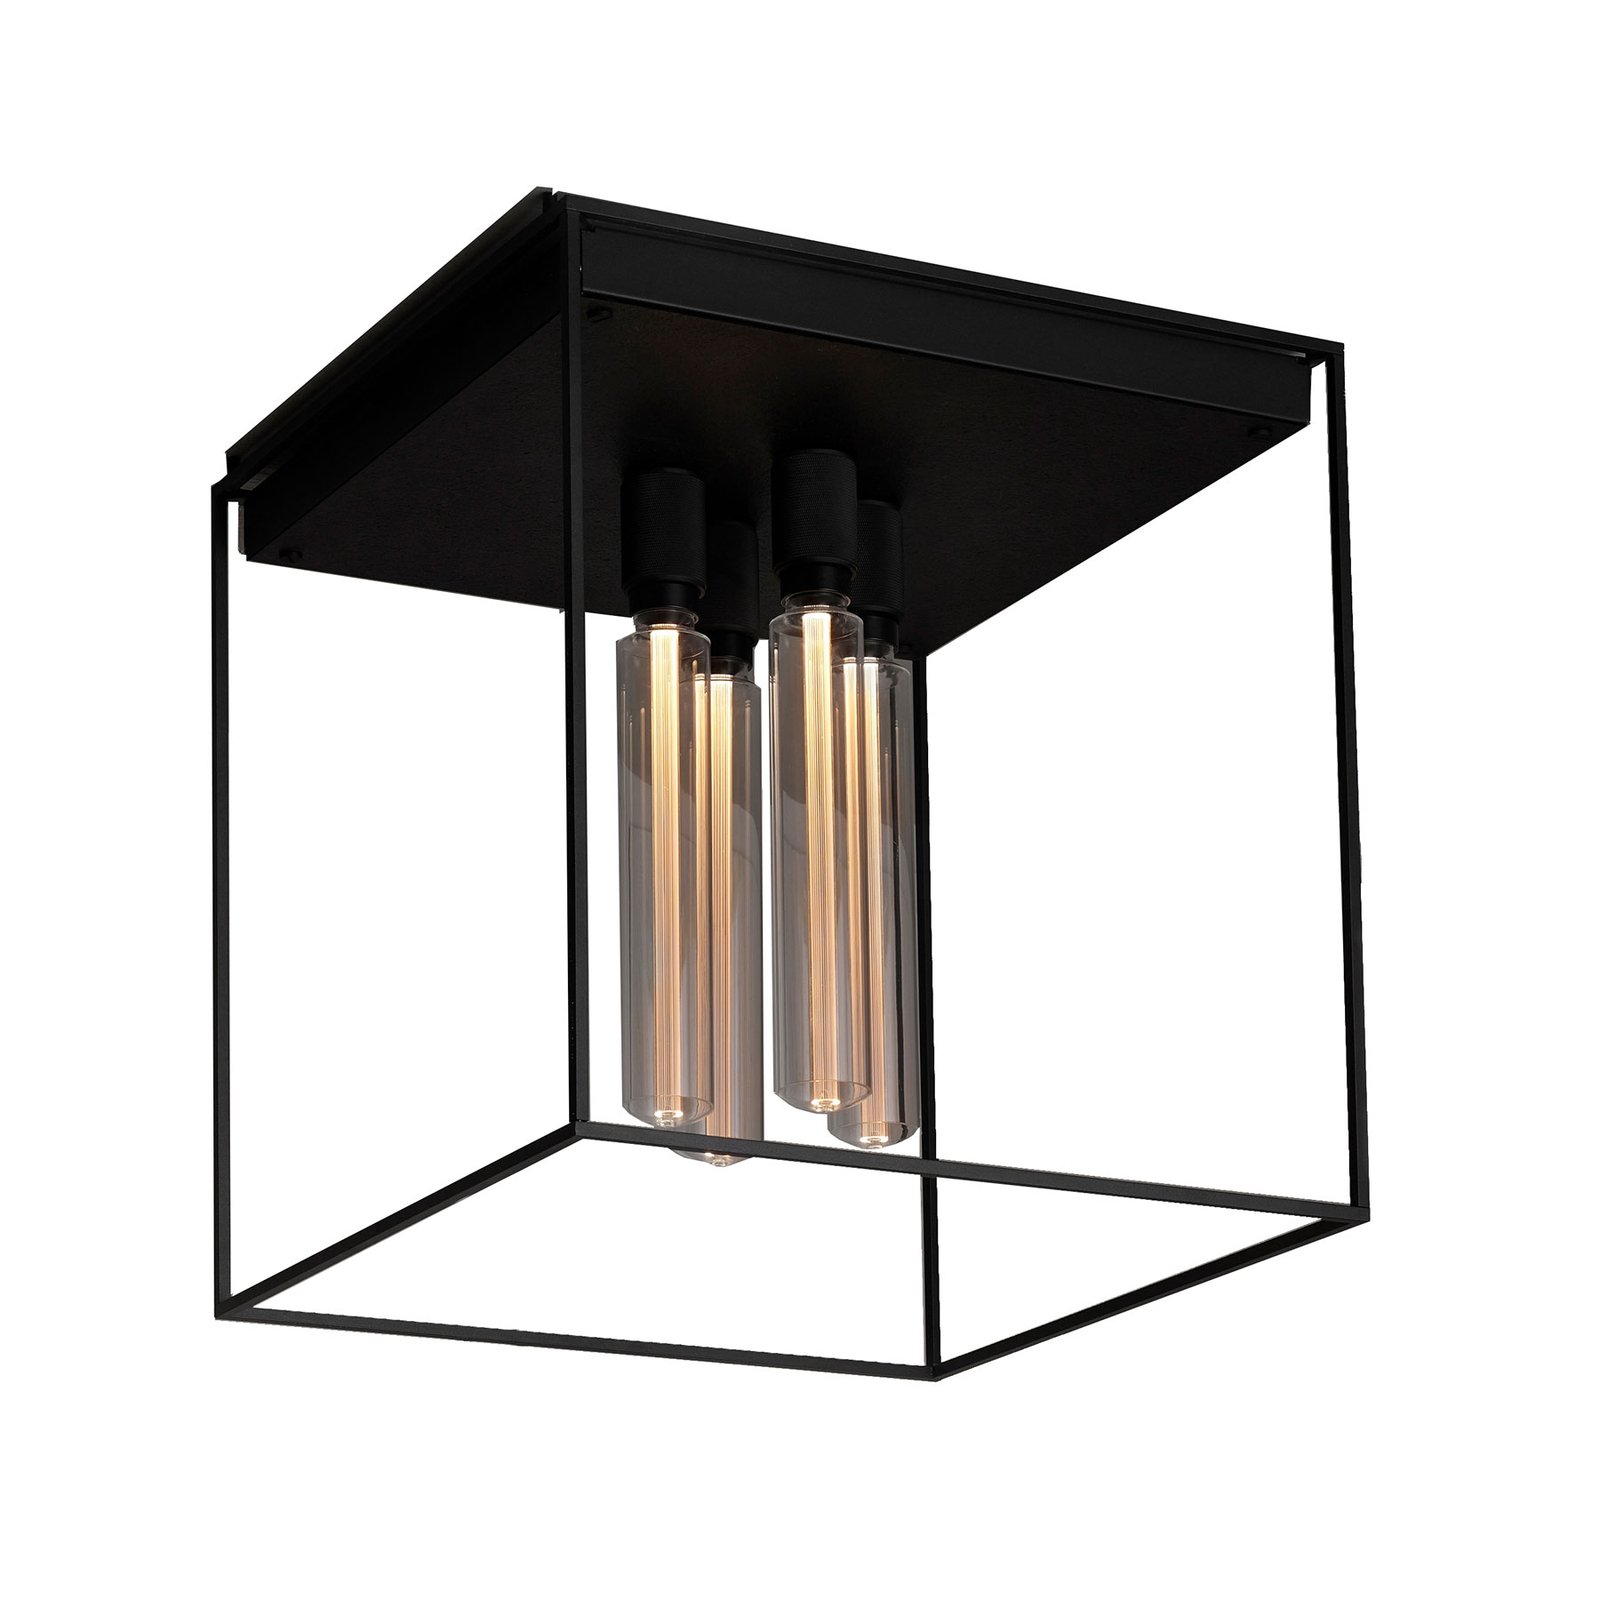 Buster + Punch Caged Ceiling 4.0 LED marble black